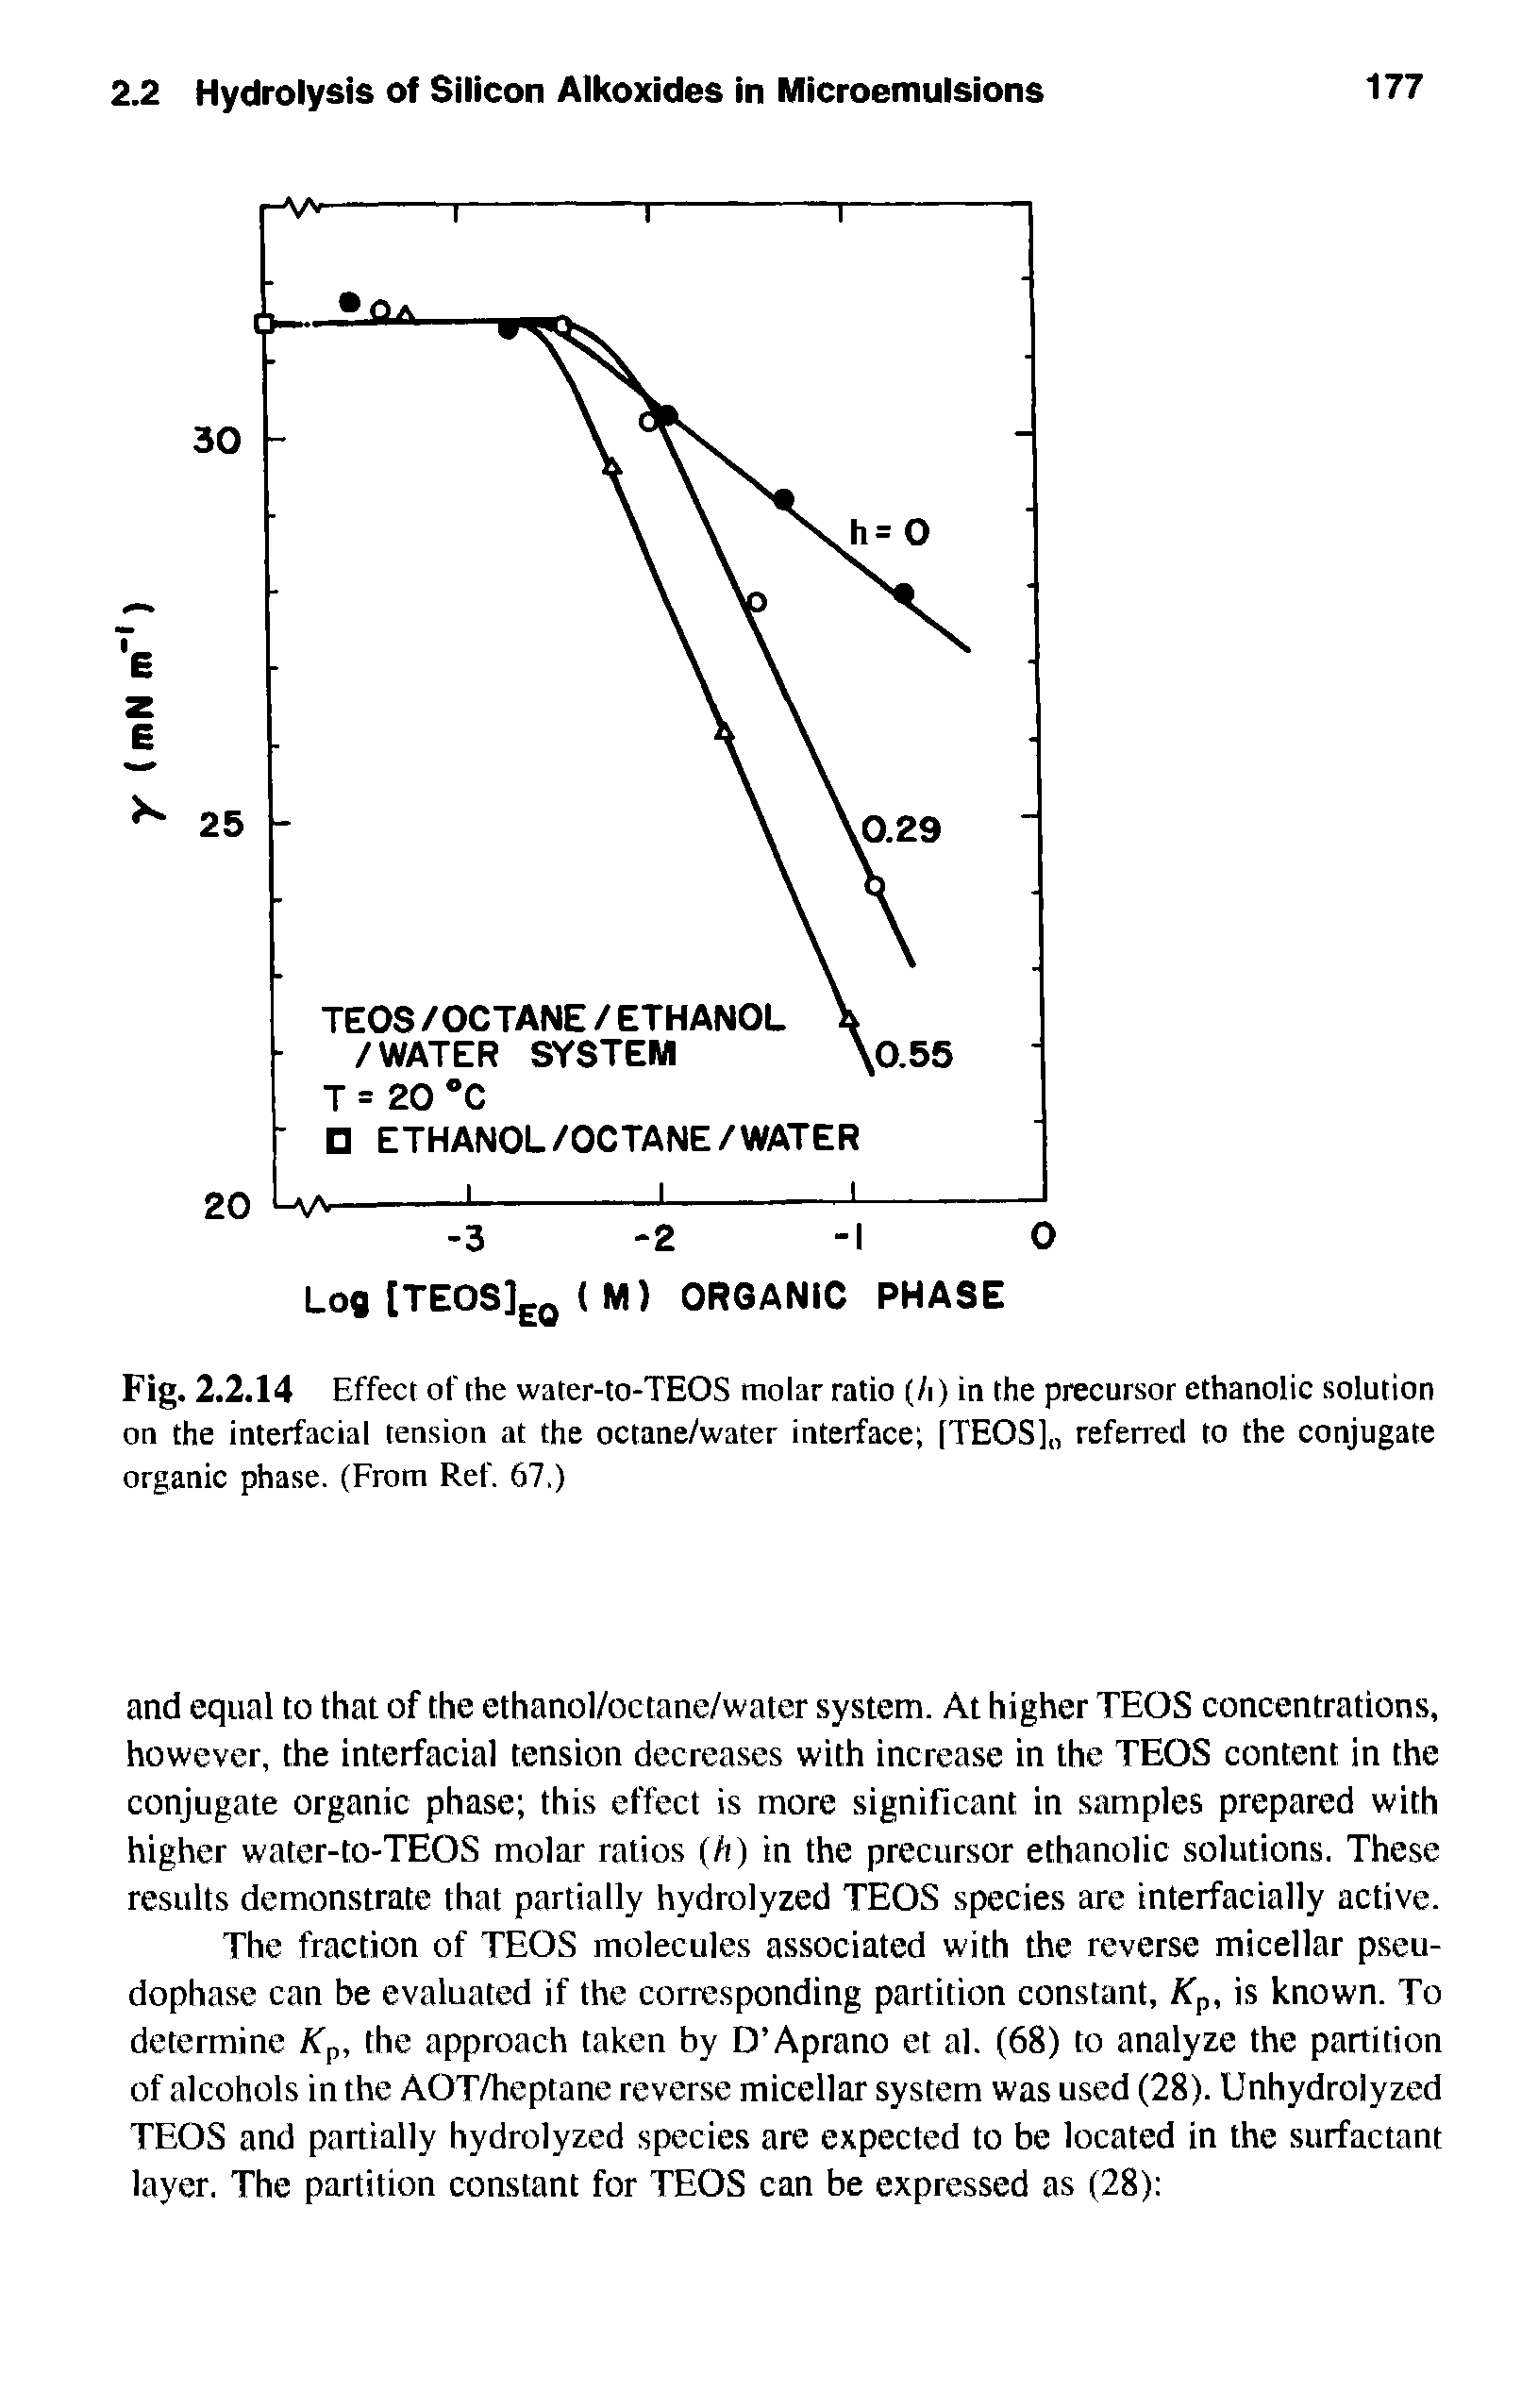 Fig. 2.2.14 Effect of the water-to-TEOS molar ratio (/i) in the precursor ethanolic solution on the interfacial tension at the octane/water interface [TEOS], referred to the conjugate organic phase. (From Ref. 67.)...